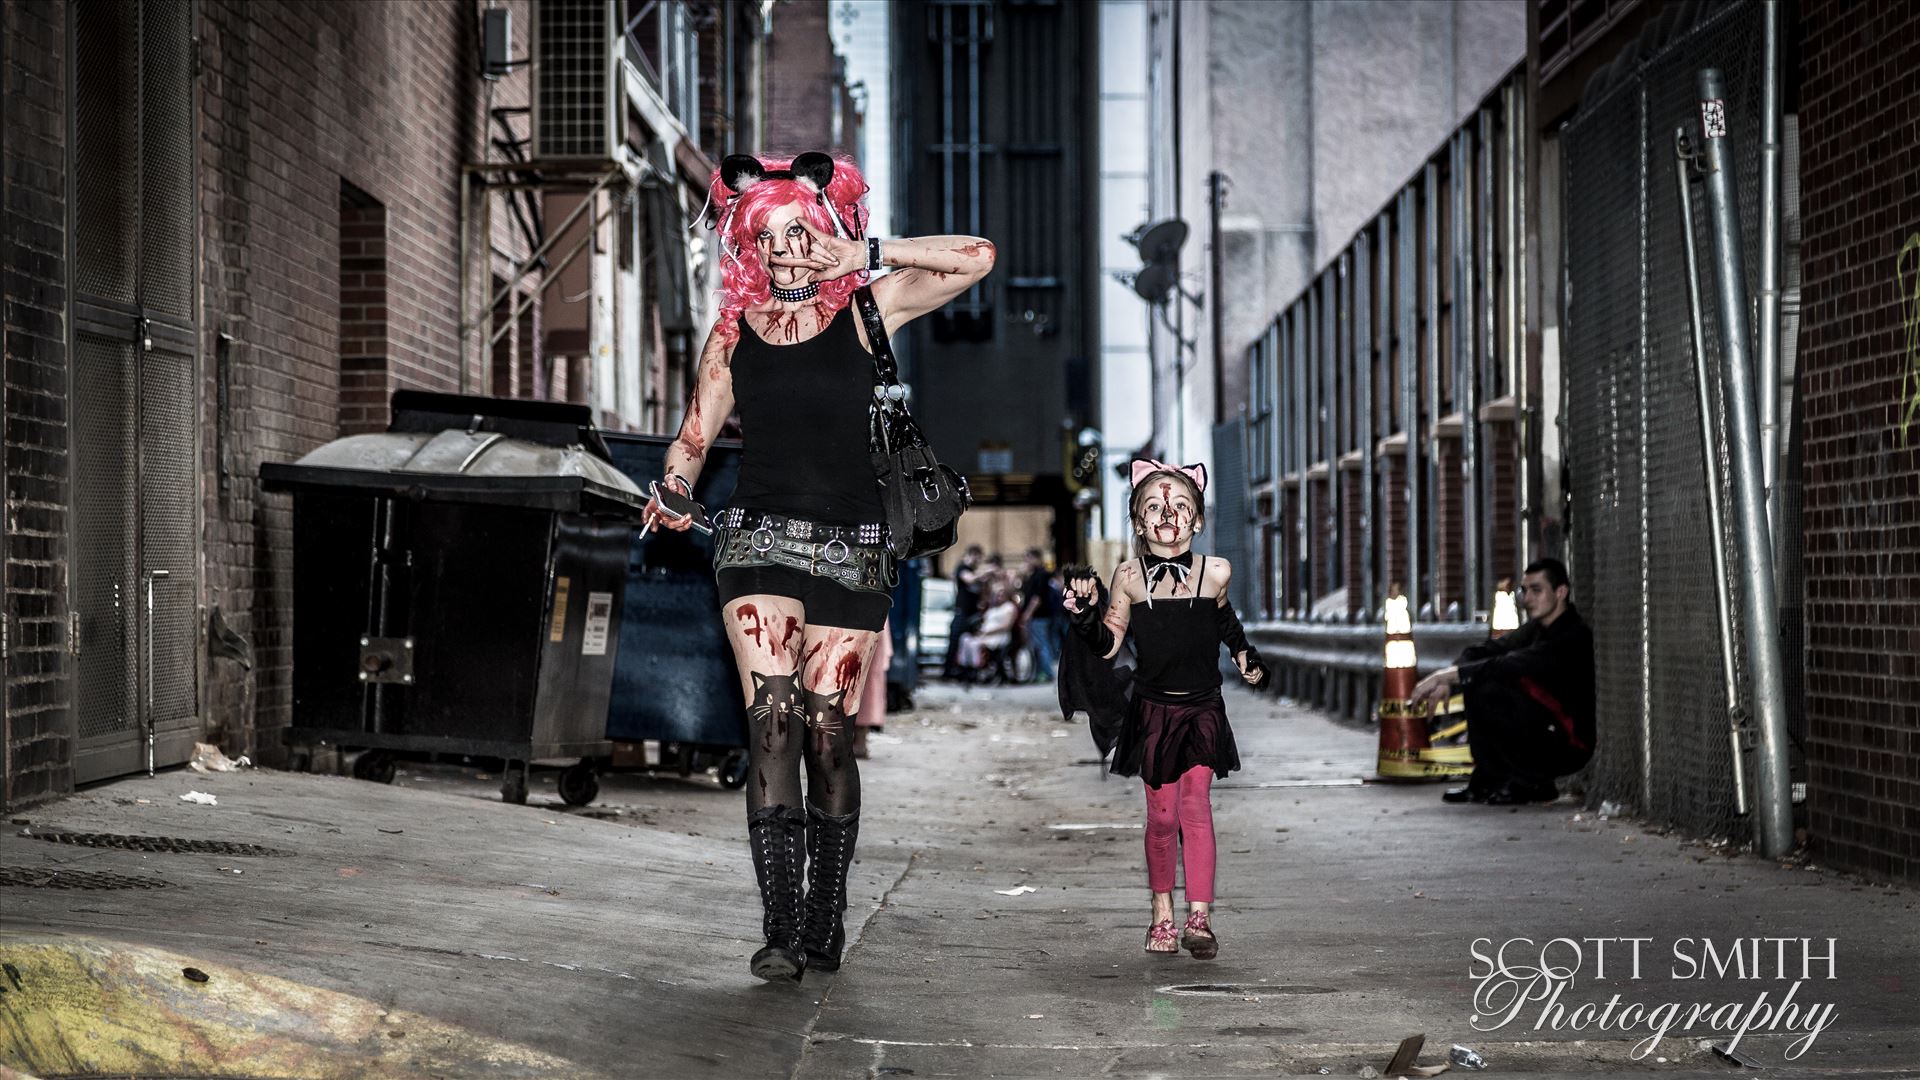 Denver Zombie Crawl 2015 18 - An adorable mother and daughter walking through an alley during Denver's 2015 Zombie Crawl. by Scott Smith Photos